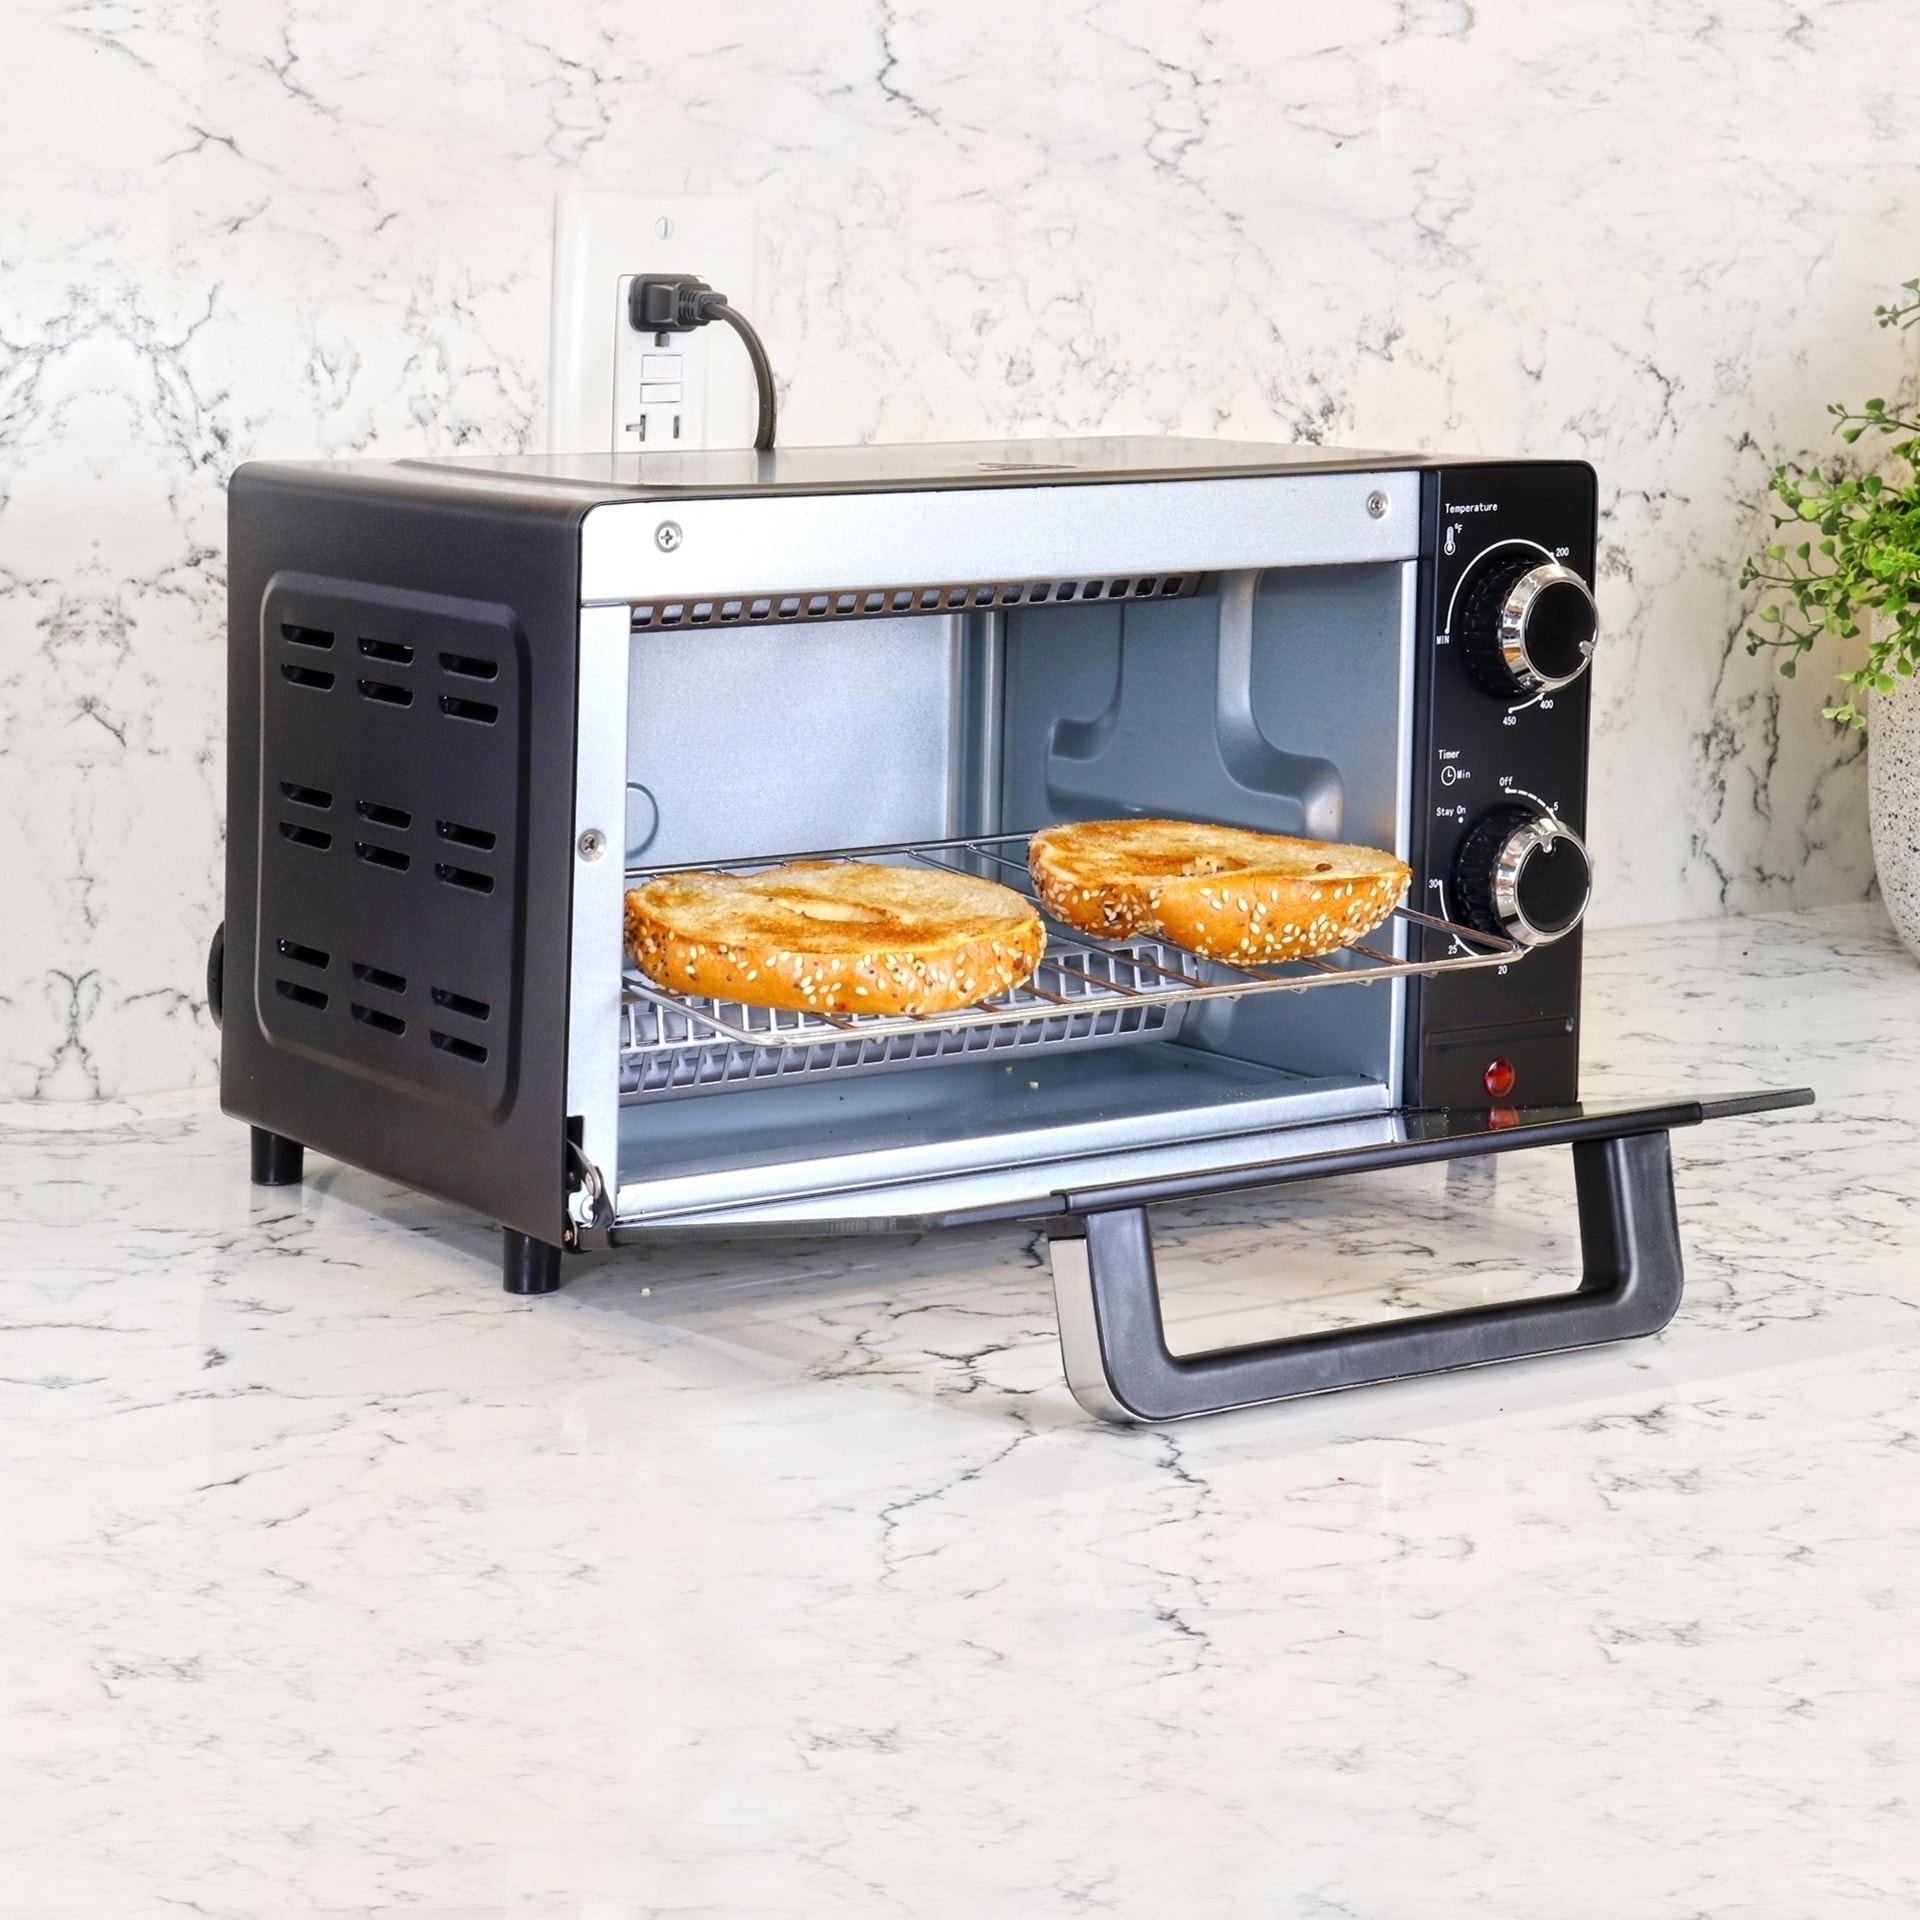 https://ak1.ostkcdn.com/images/products/is/images/direct/a929656c348da822d5fbc5bd74767b86011e3e47/Total-Chef-4-Slice-Toaster-Oven%2C-1000W%2C-Black-Compact-Countertop-Oven-with-Natural-Convection%2C-Temperature-Control-Dial.jpg